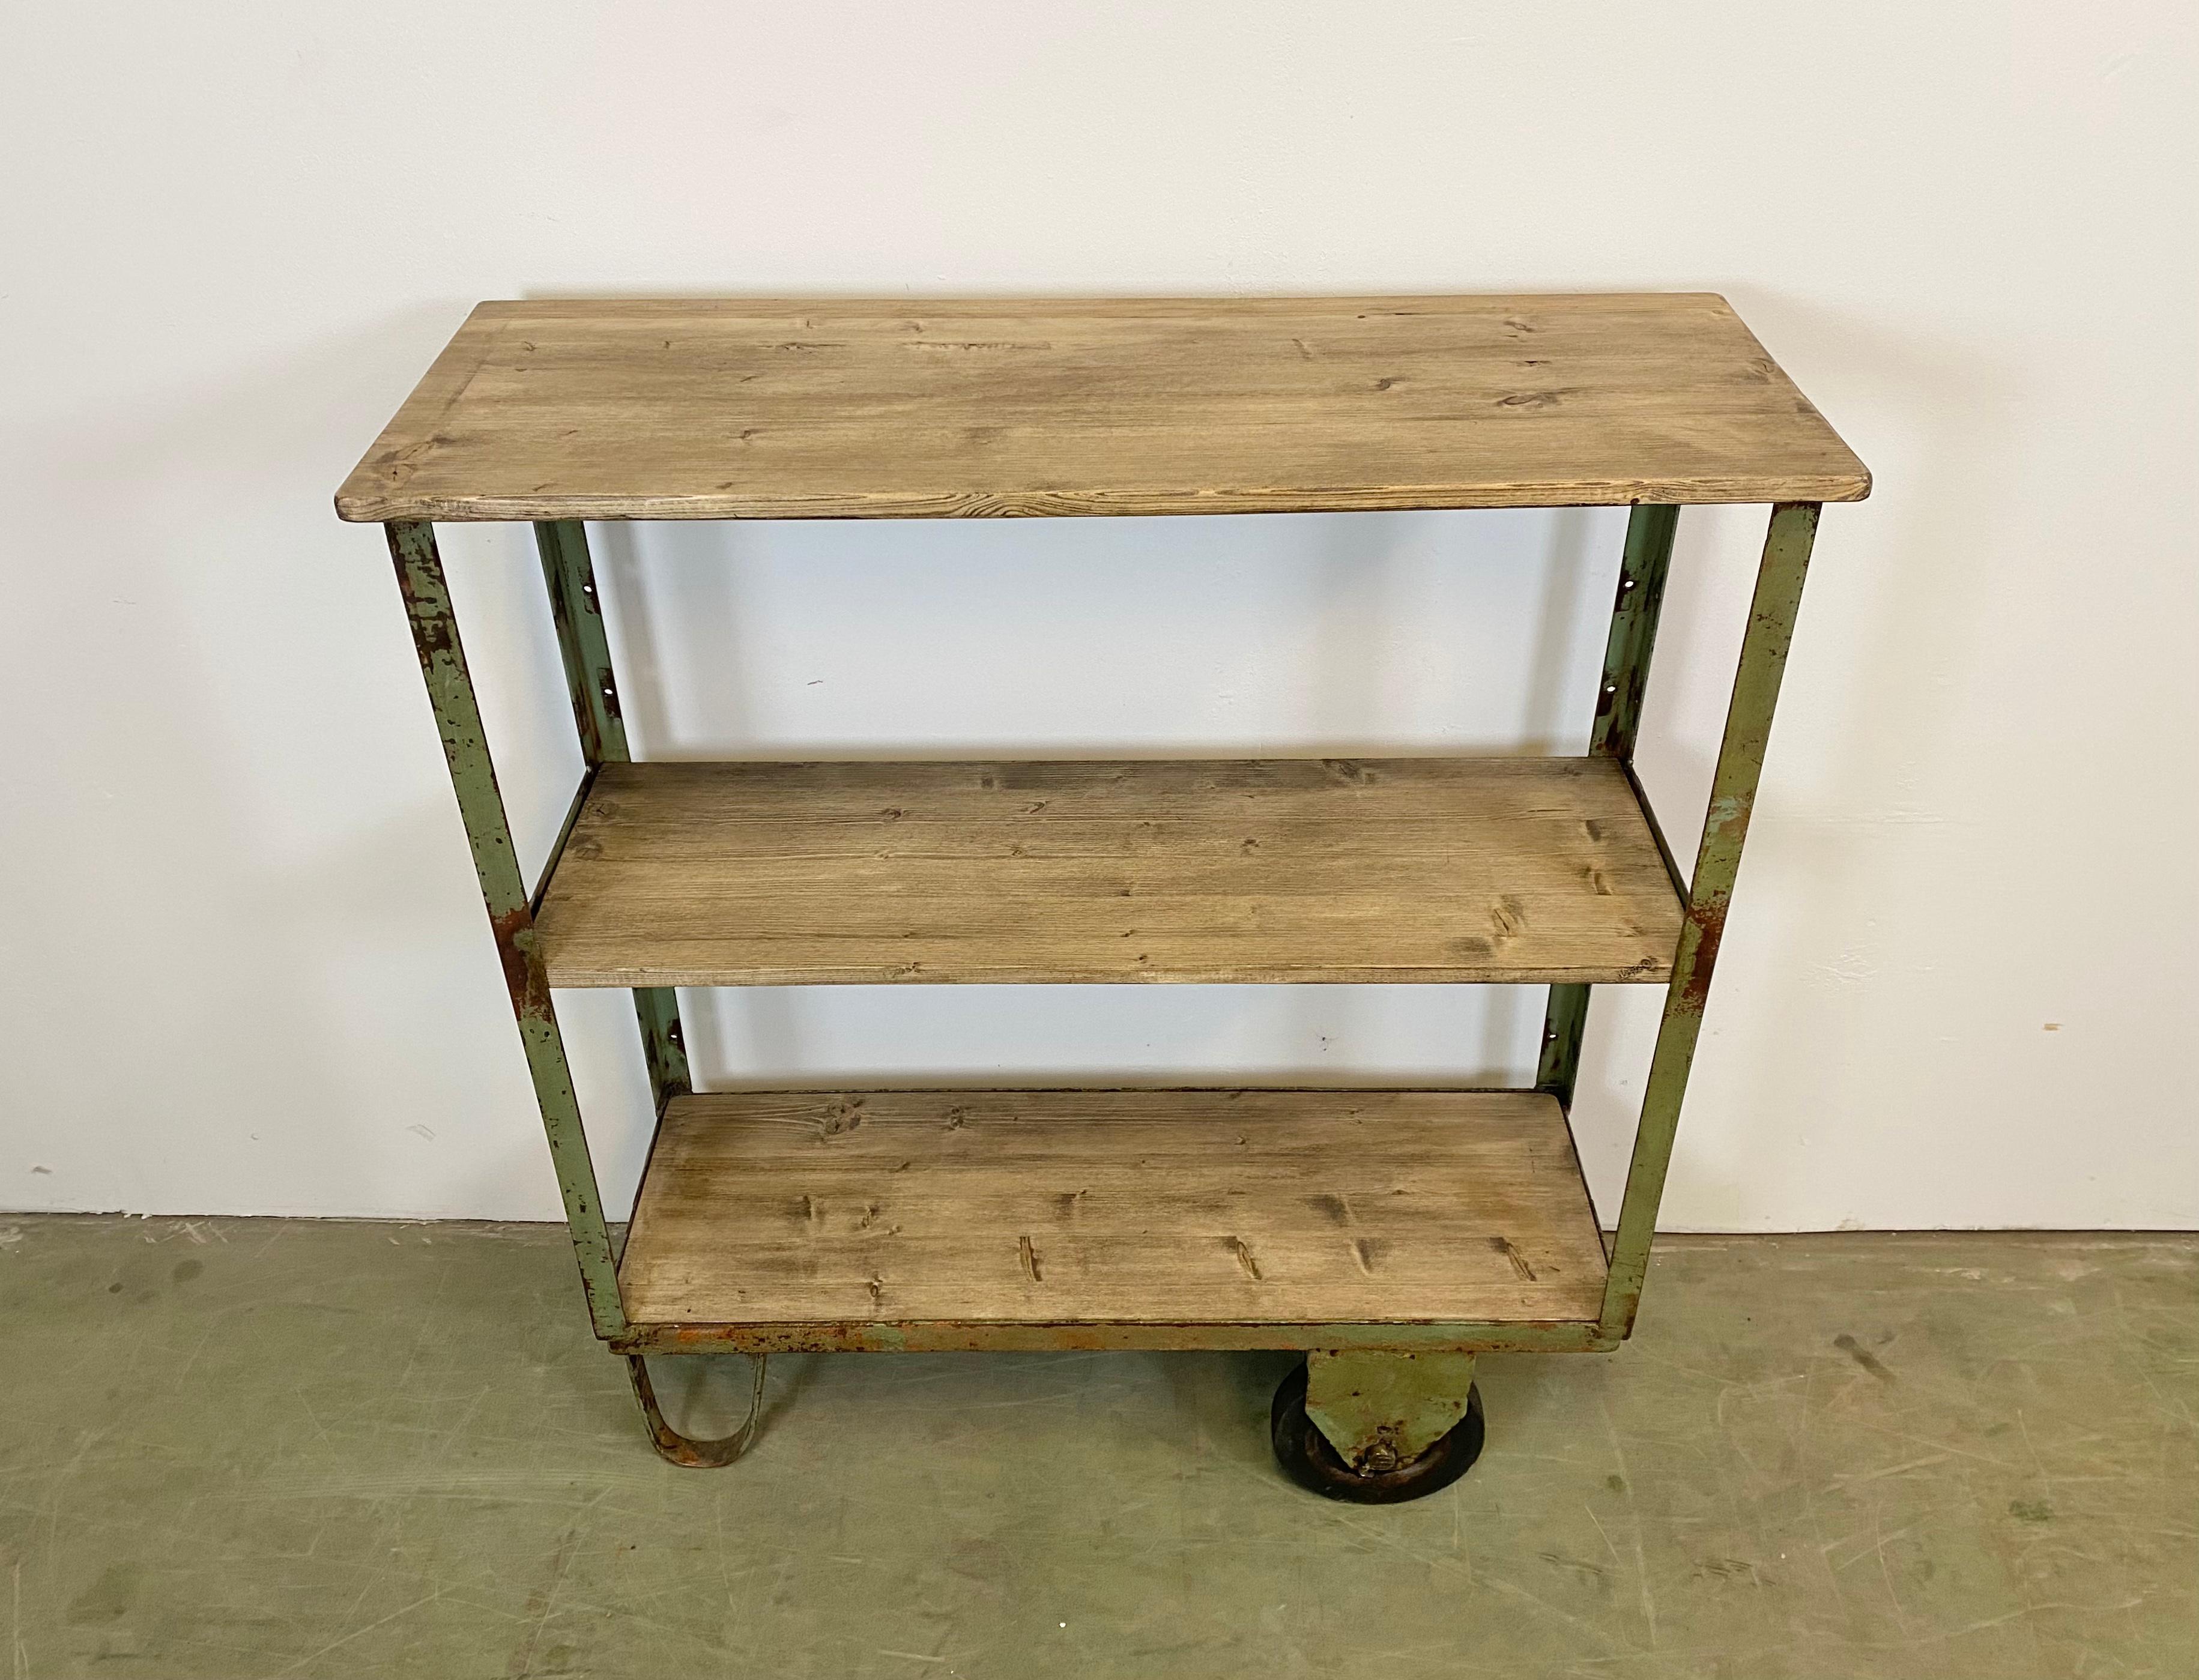 Industrial shelf from the 1960s. It features a green iron construction, three wooden shelves and two original wheels. The weight of the shelf is 32 kg.